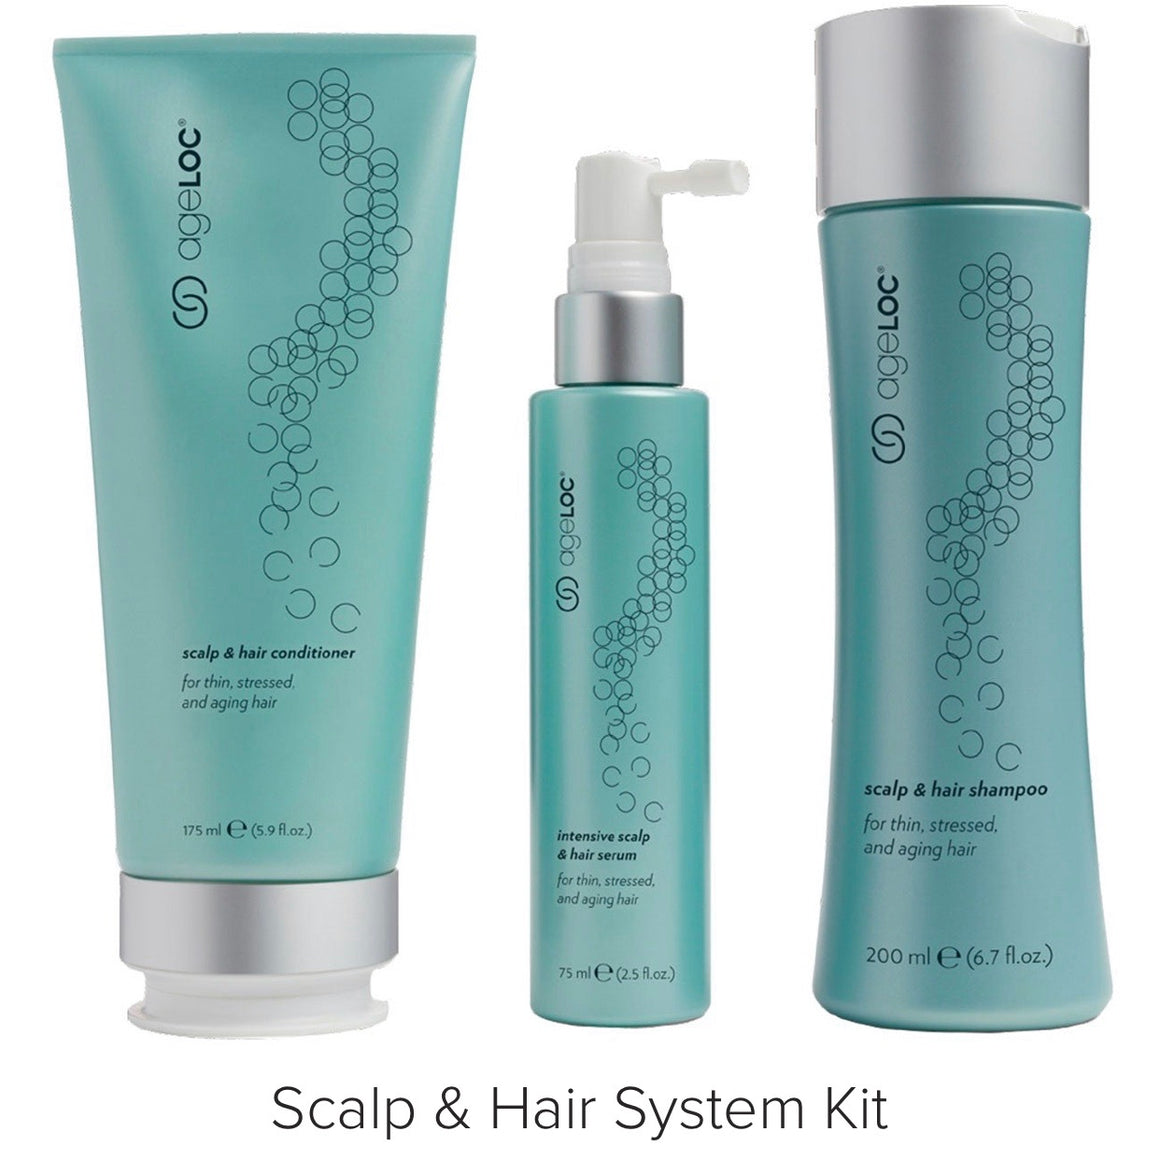 ageLOC Hair System - save $30 and get FREE make up bag!